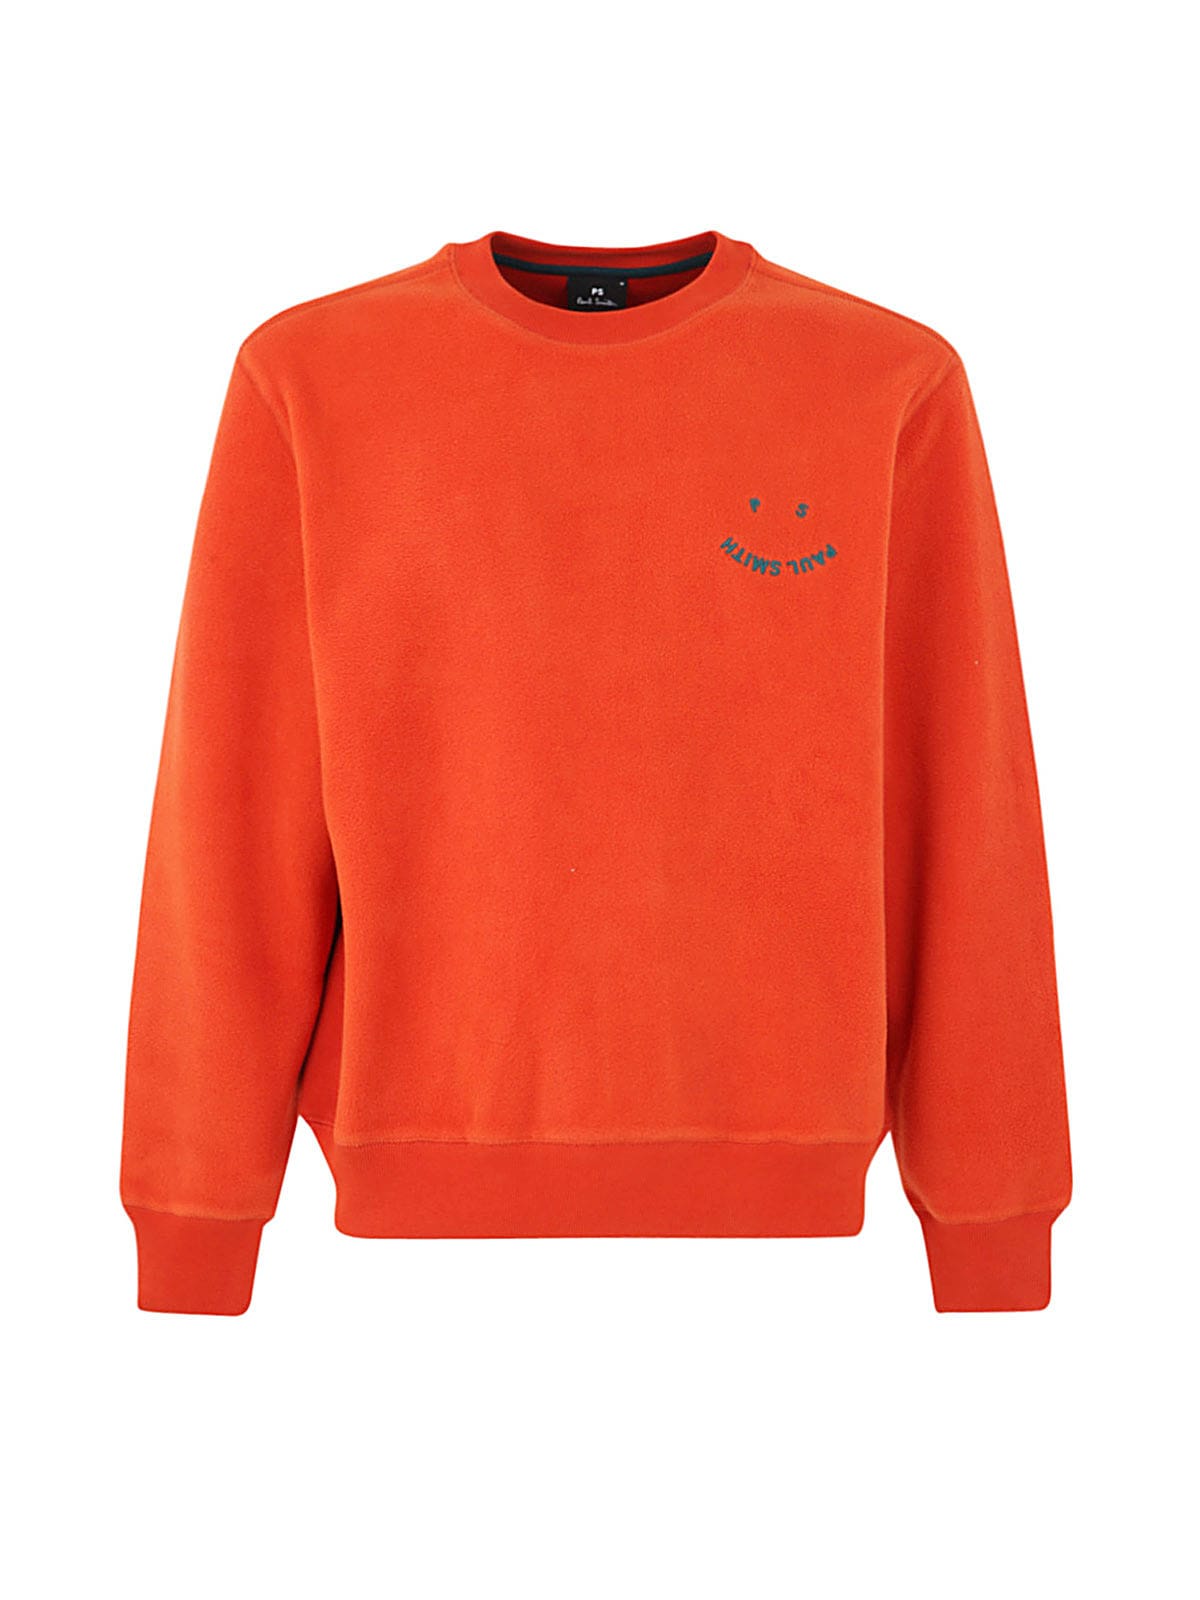 PS by Paul Smith Mens Sweat Ps Happy Emb